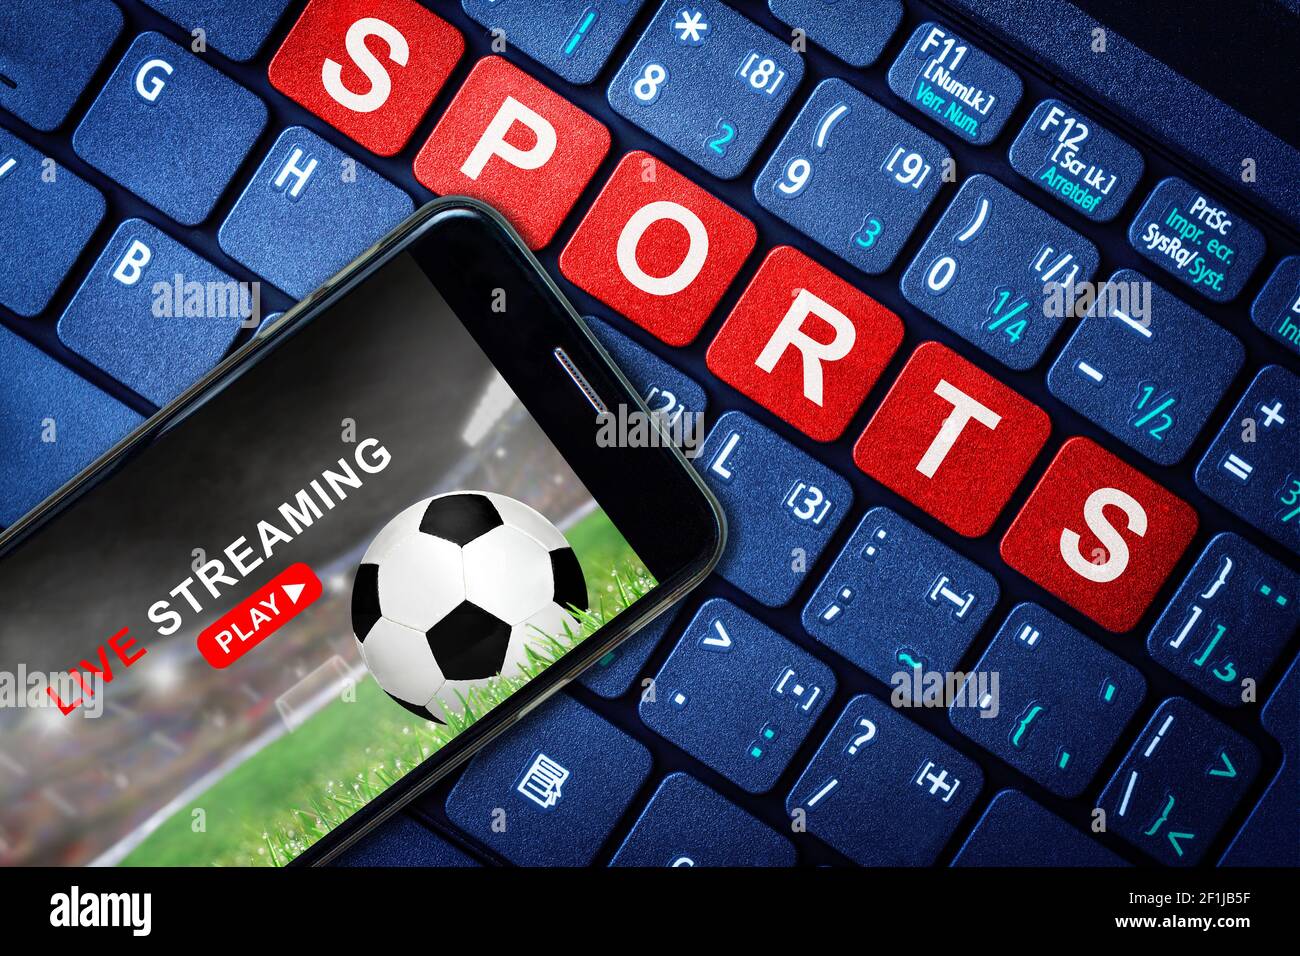 Sports Live streaming concept showing Soccer or football game broadcast on smartphone with laptop high tech background